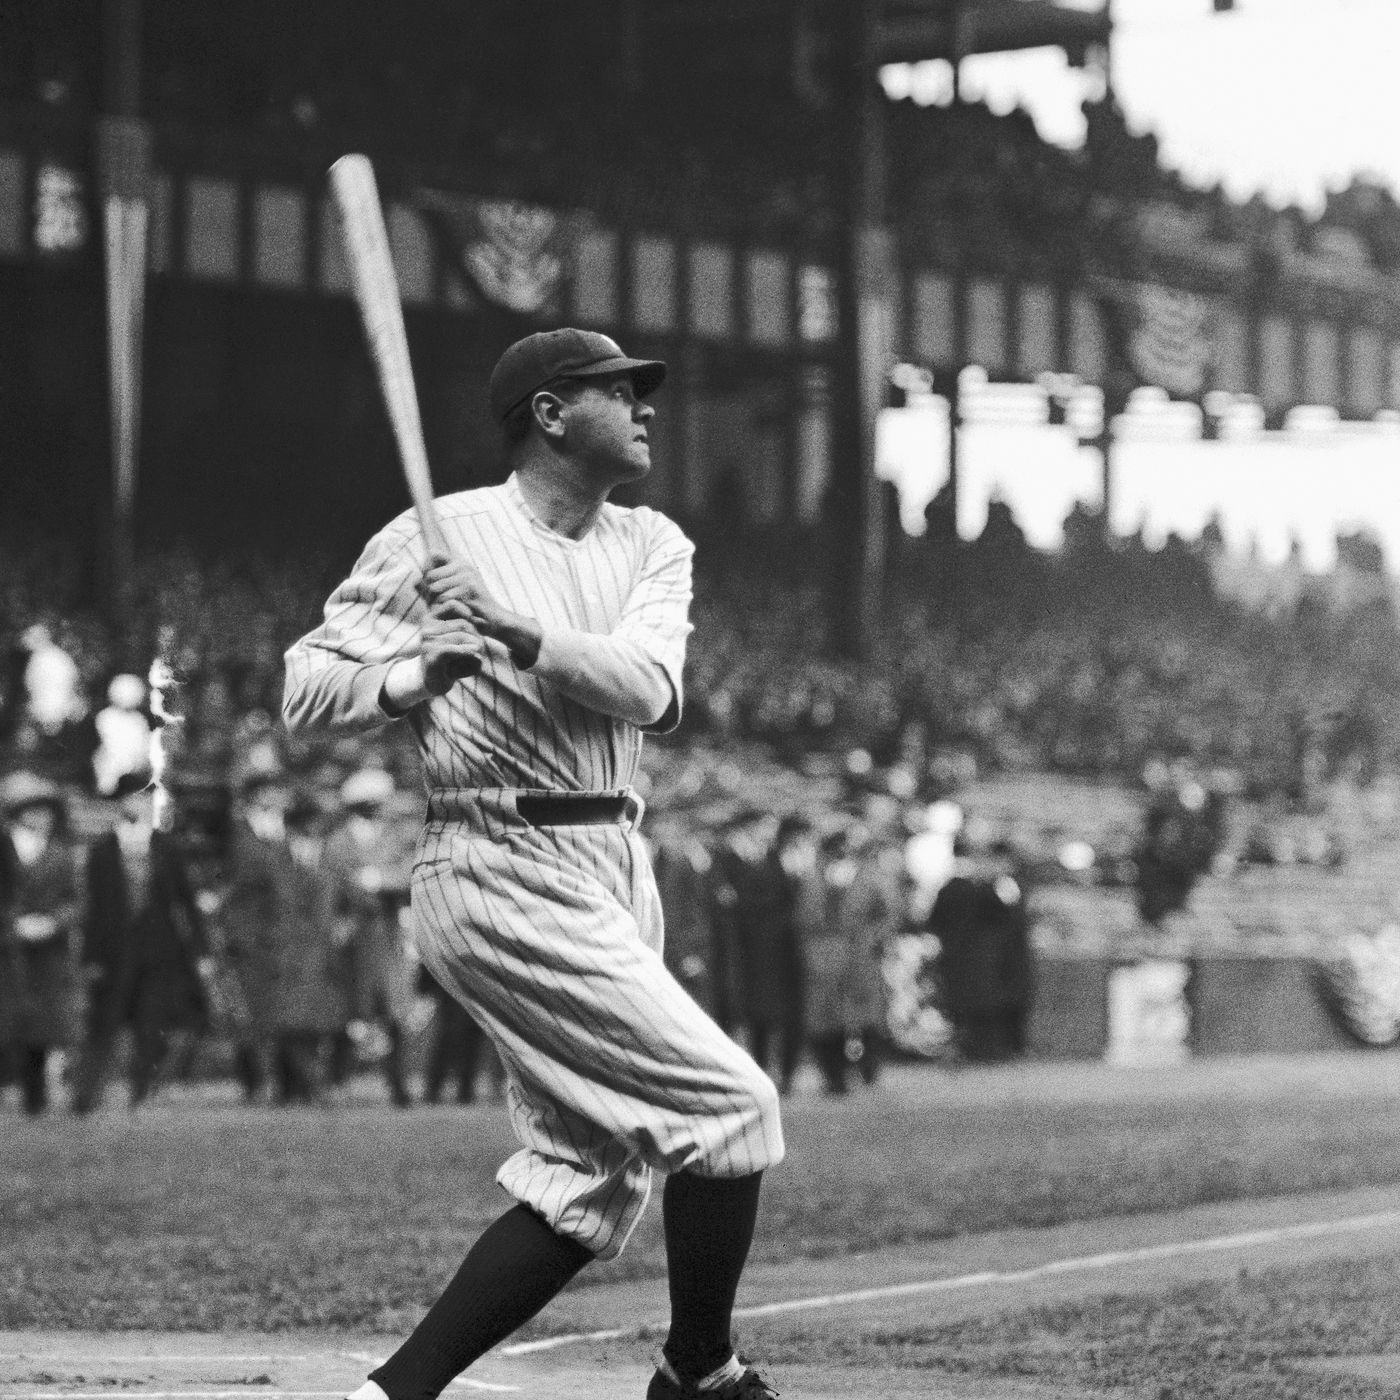 Babe Ruth's Legacy: Celebrating the 100th Anniversary of His First Home Run at Yankee Stadium and the Best Baseball Cards to Collect